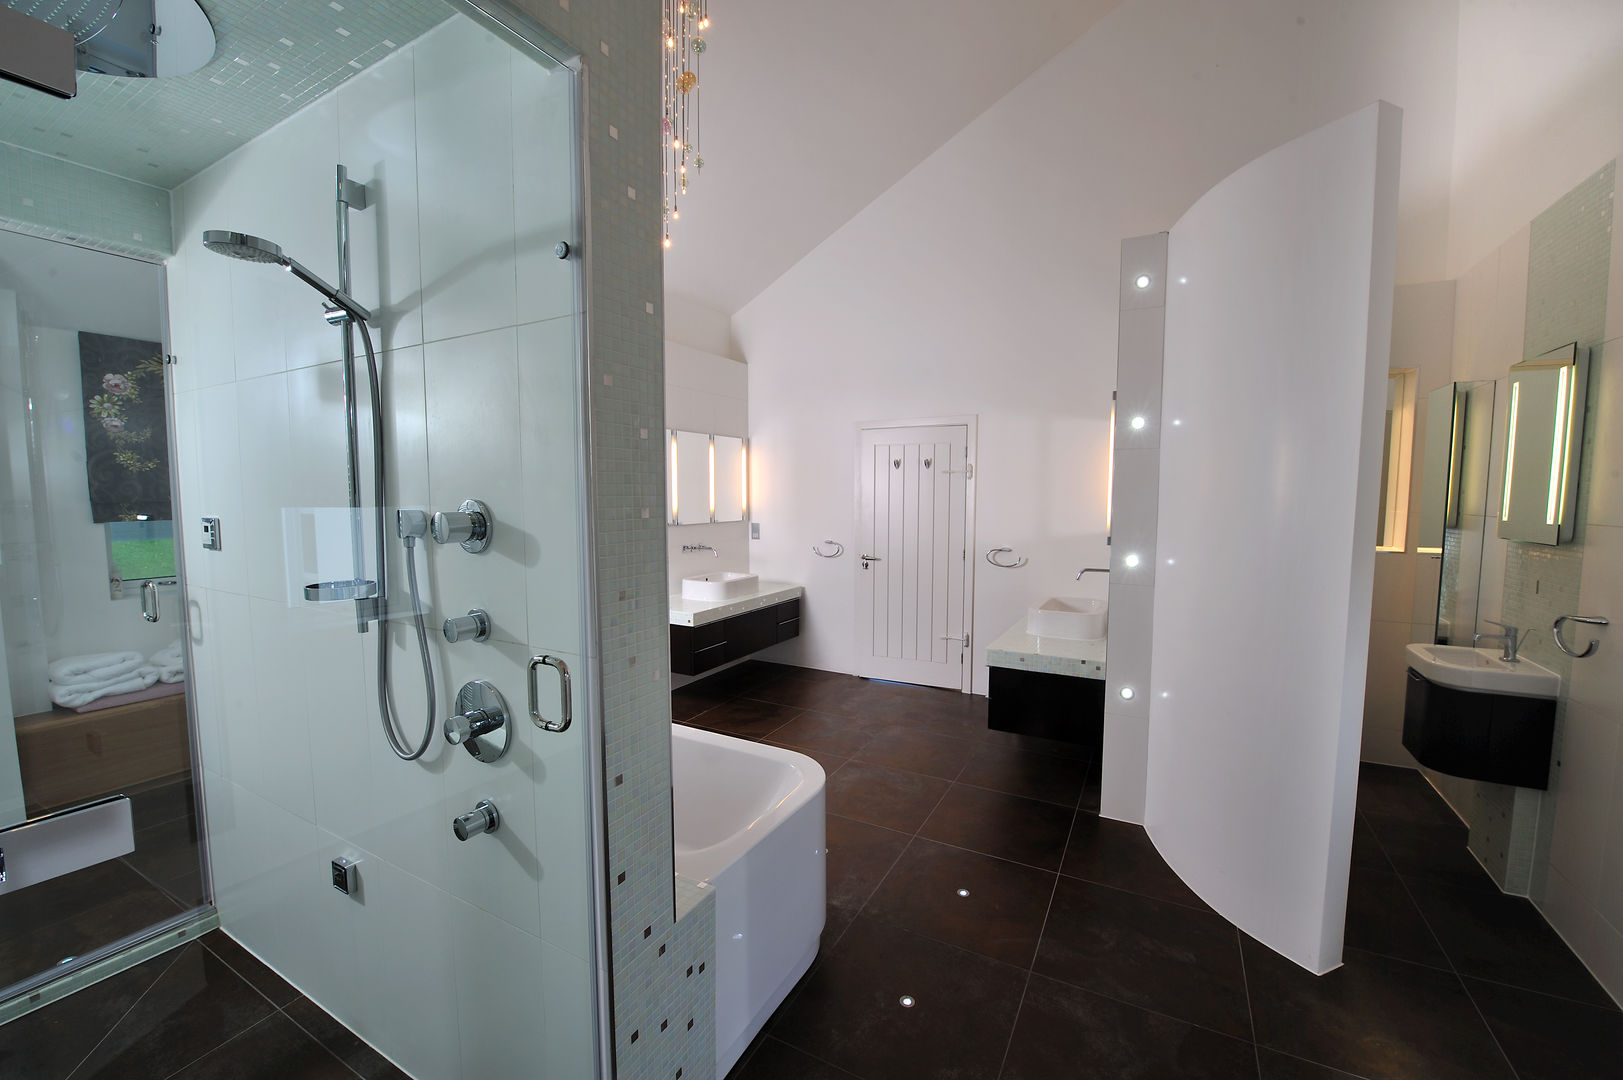 Sea House, Porth | Cornwall, Perfect Stays Perfect Stays Banheiros ecléticos Bathroom,ensuite,wall hung basin,walk in shower,luxury,modern,beach house,holiday home